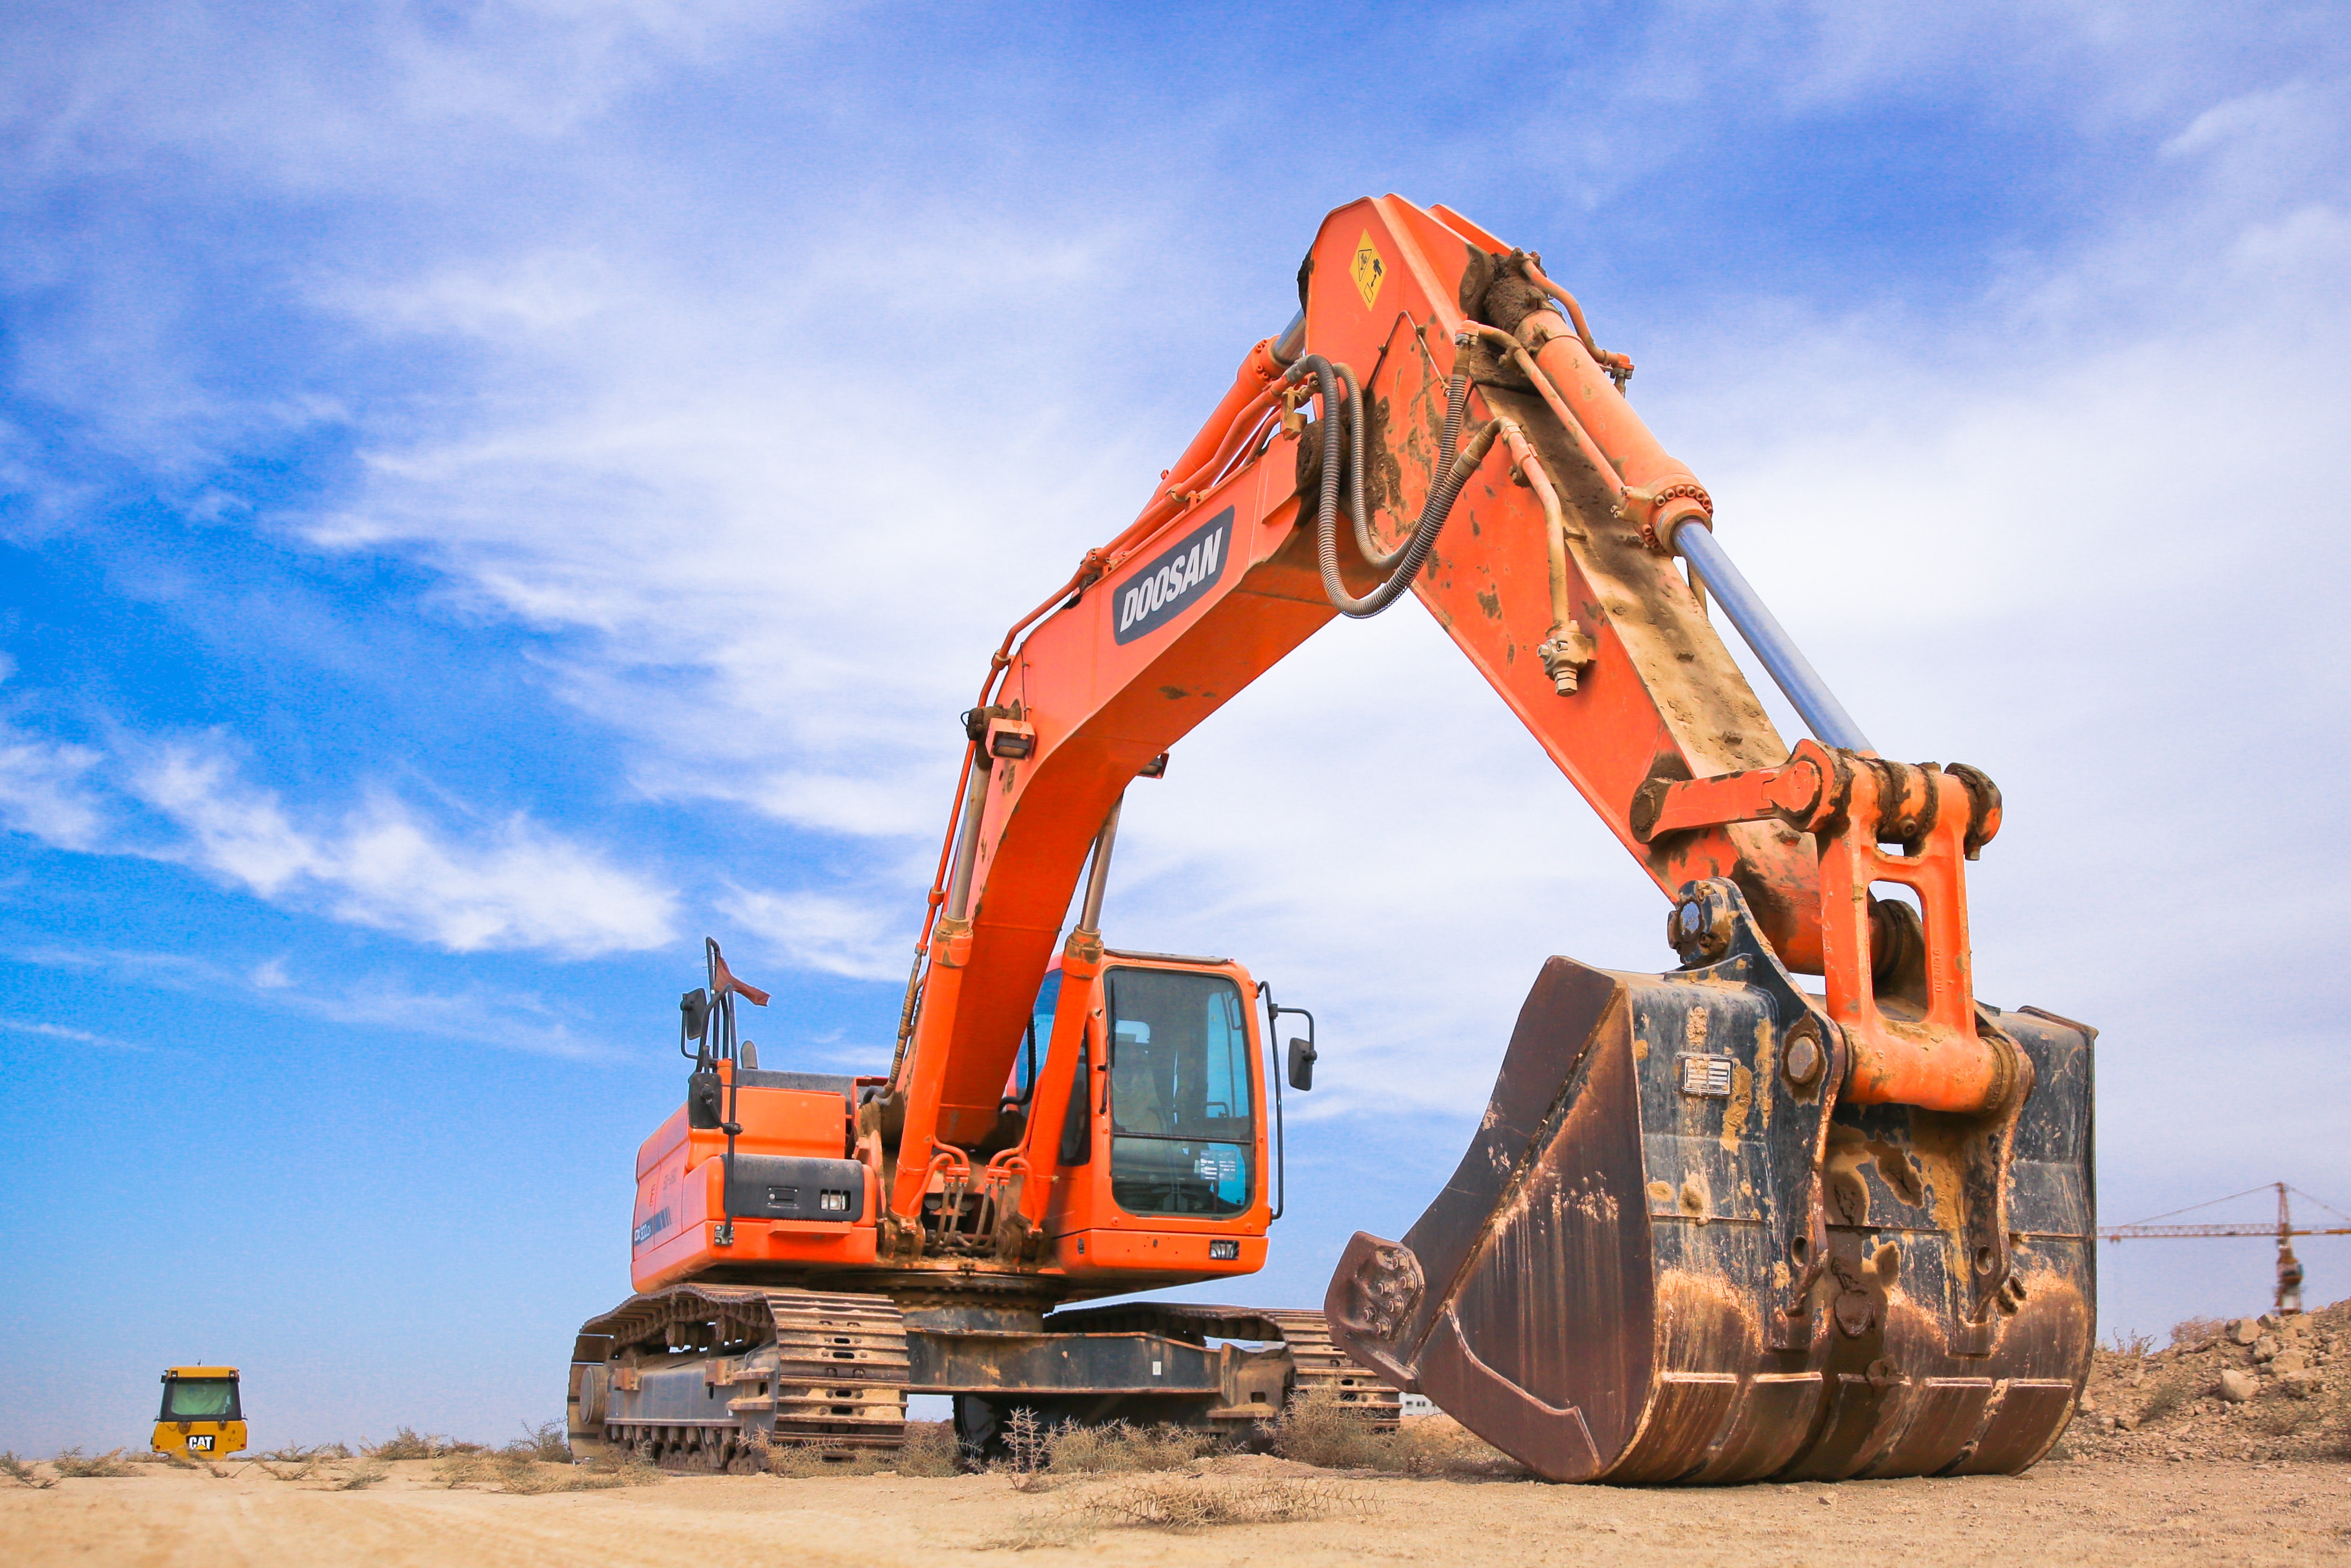 Red excavator on dry field photo